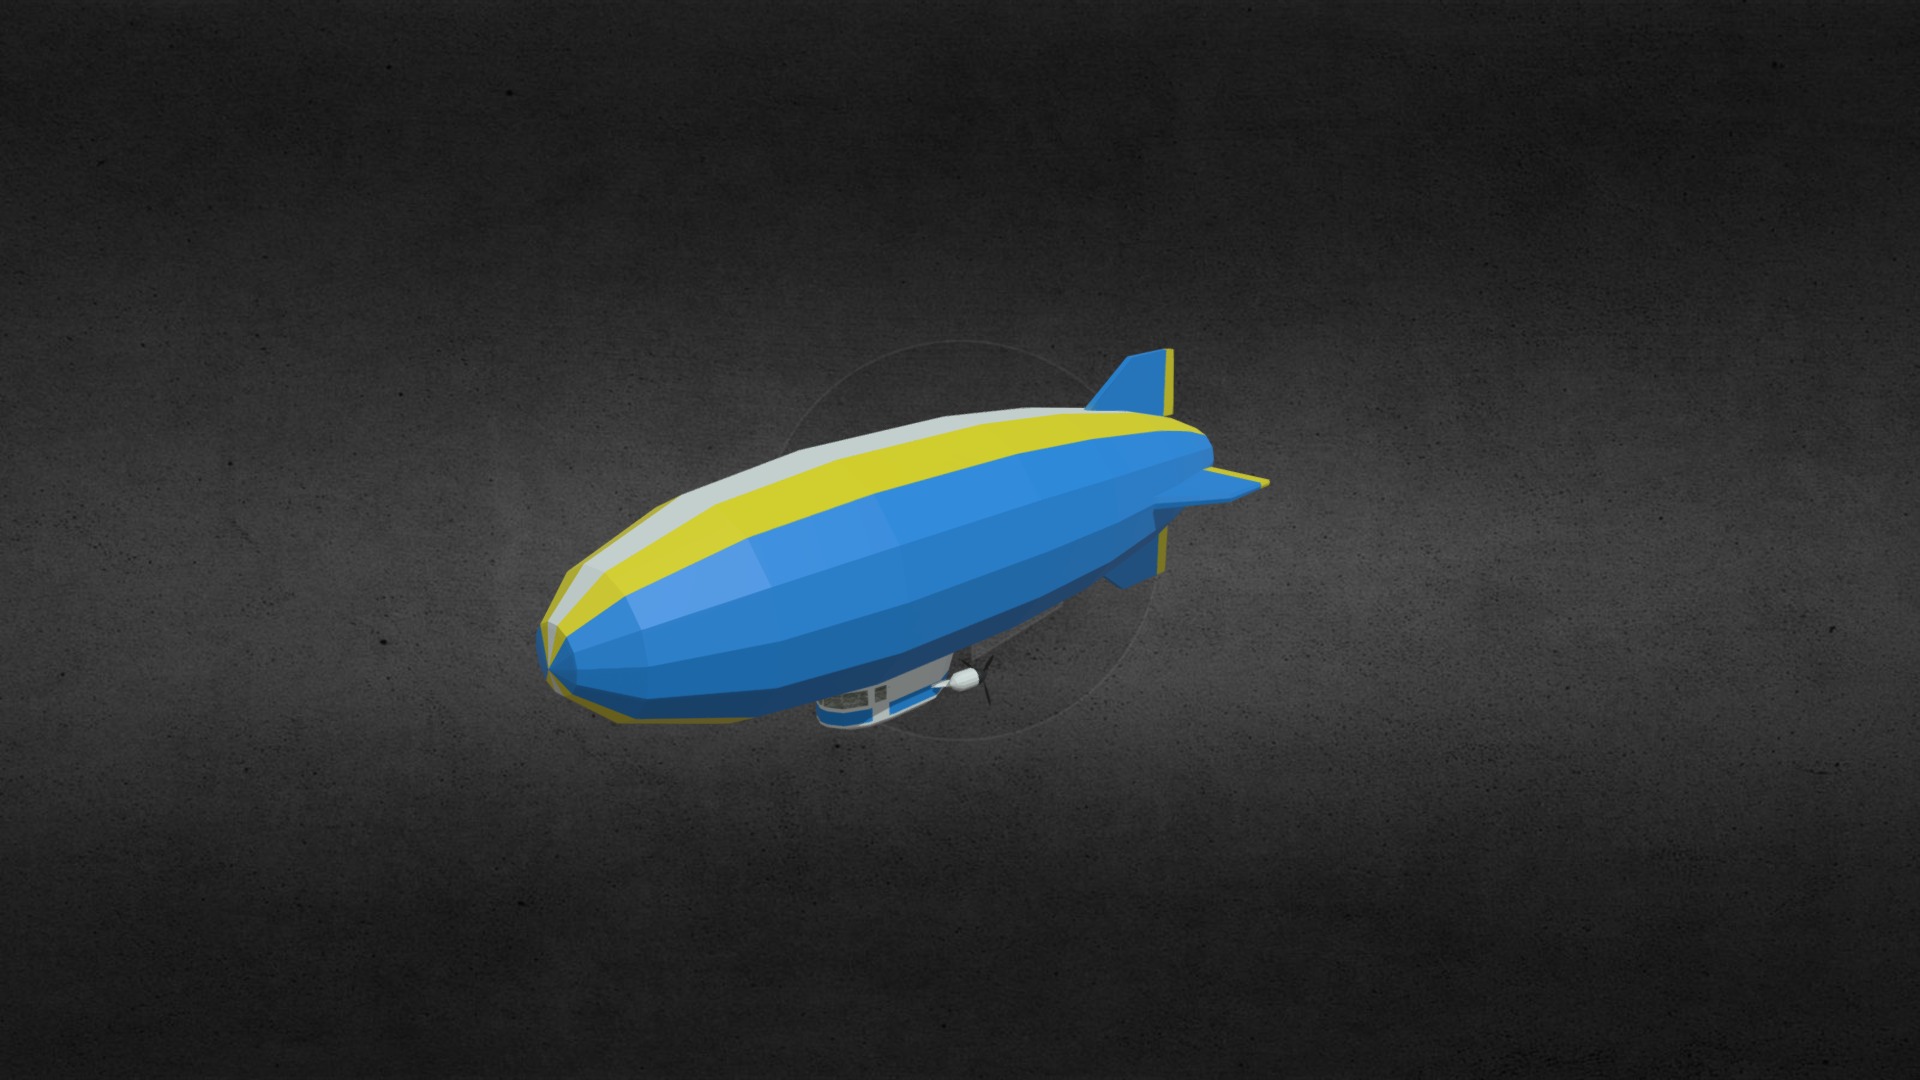 3D model airship - This is a 3D model of the airship. The 3D model is about a small blue and yellow object.